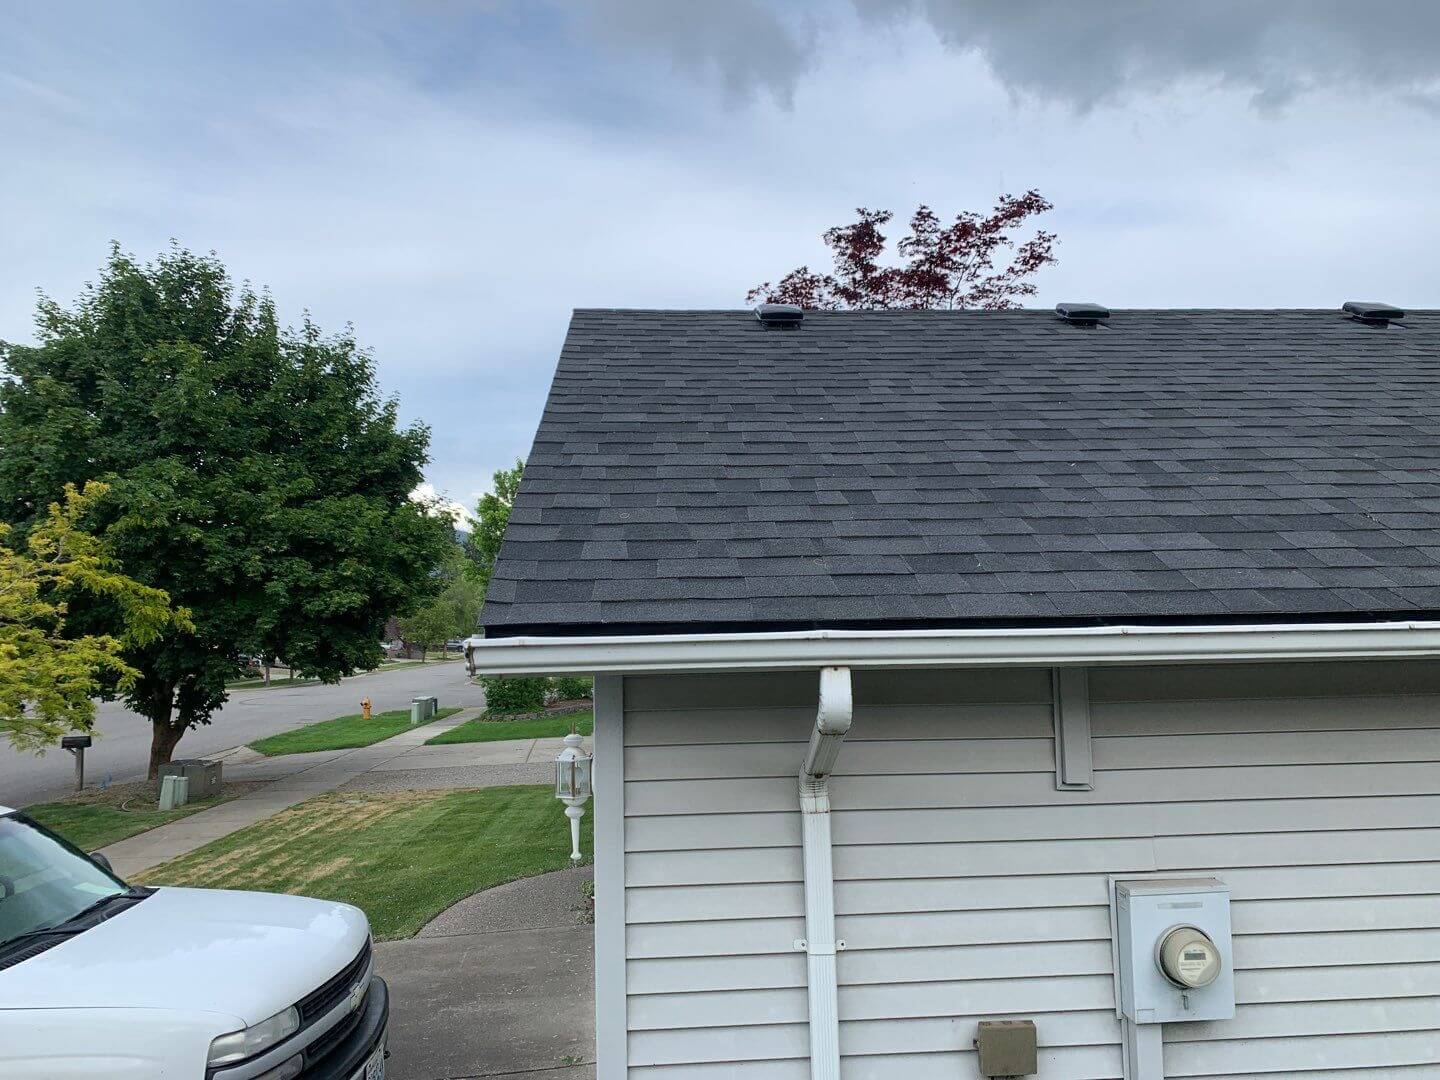 Repair roofing project